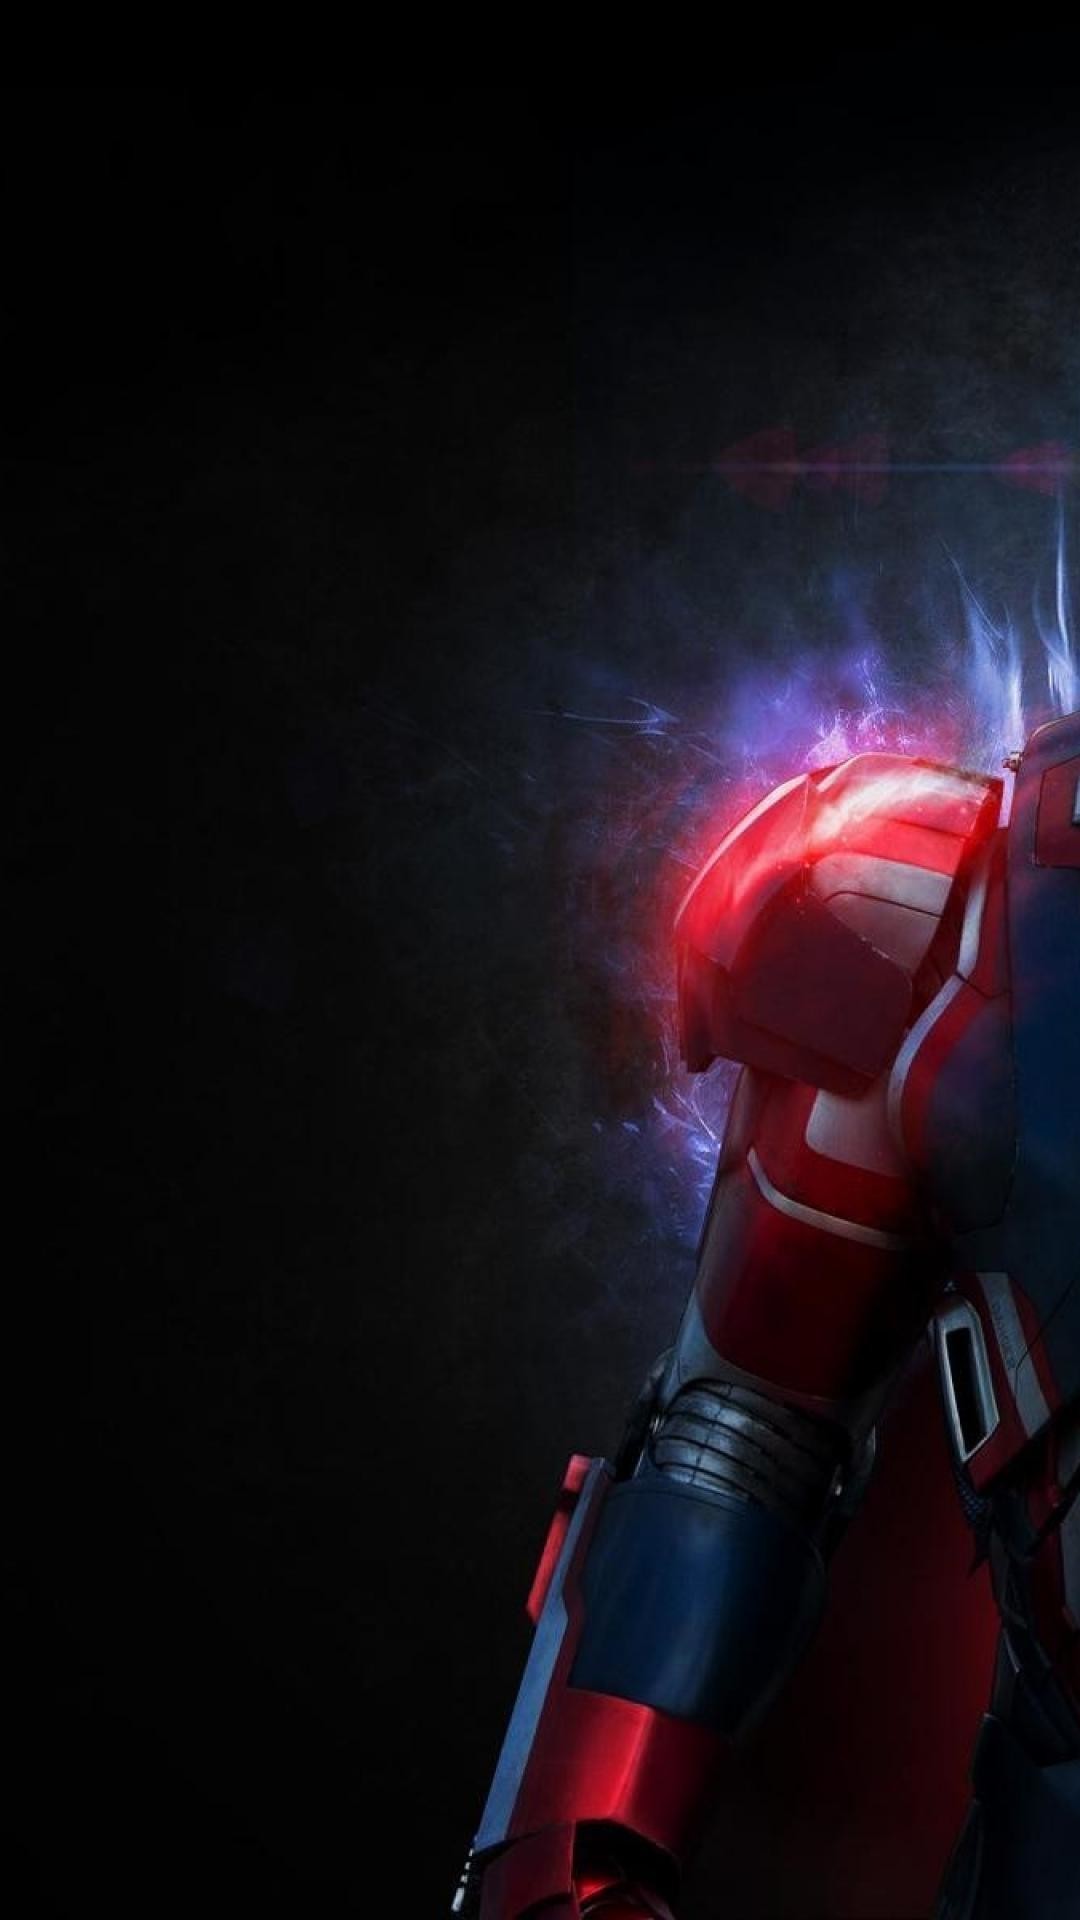 Wallpaper Hd Download For Android Mobile Iron Man